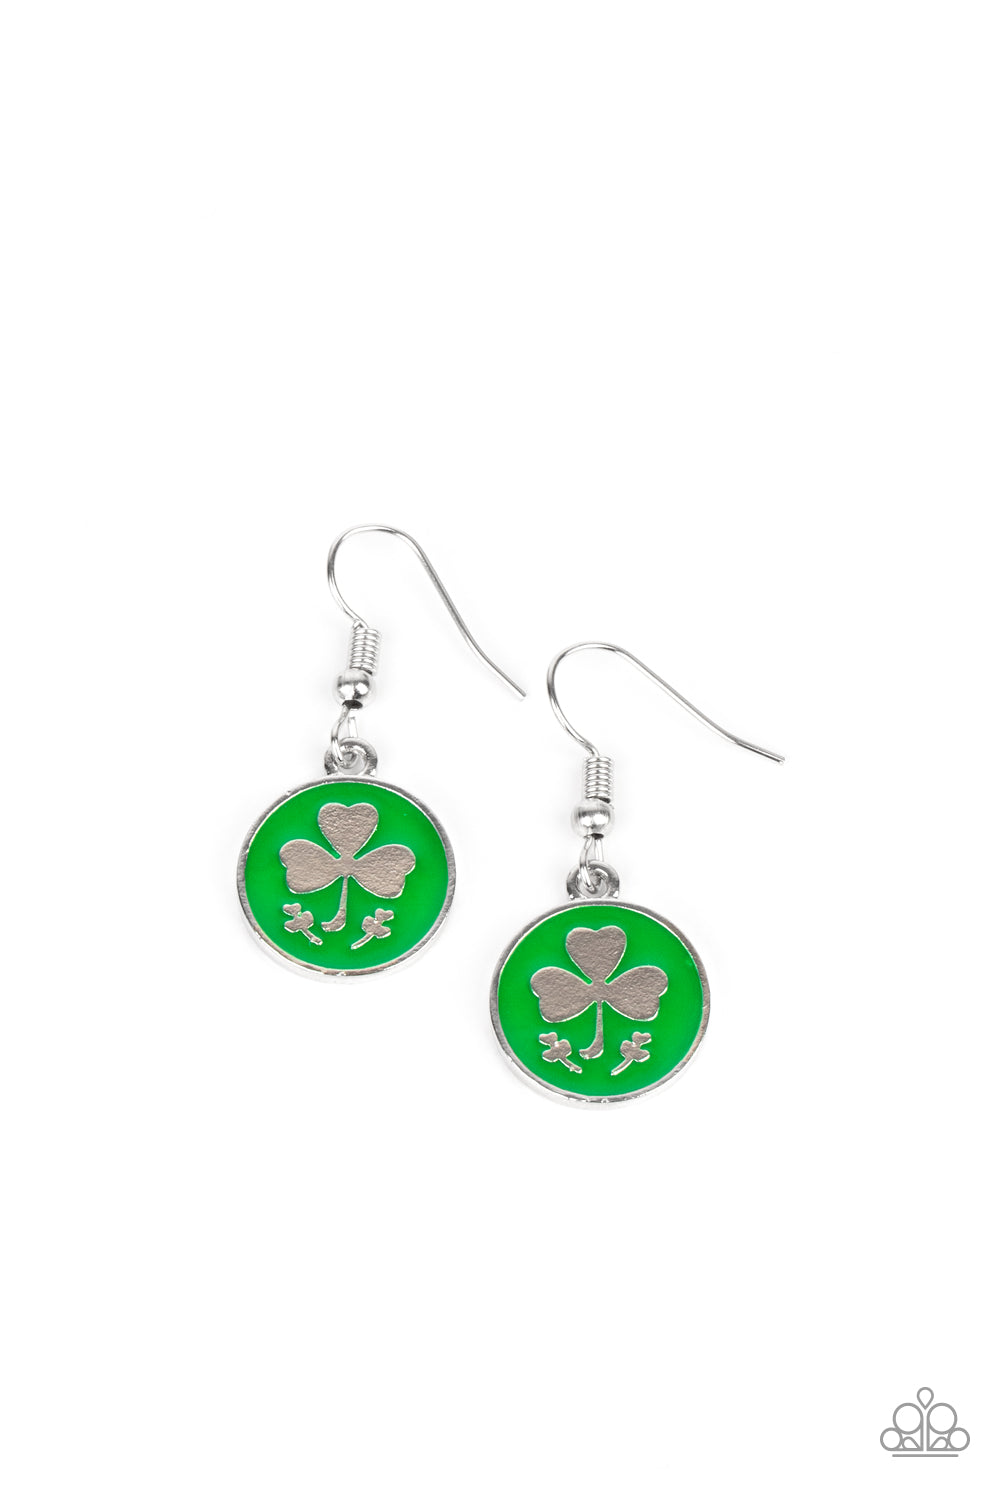 DANCING LEPRECHAUNS - ASSORTED SET OF 5 PAIRS OF EARRINGS